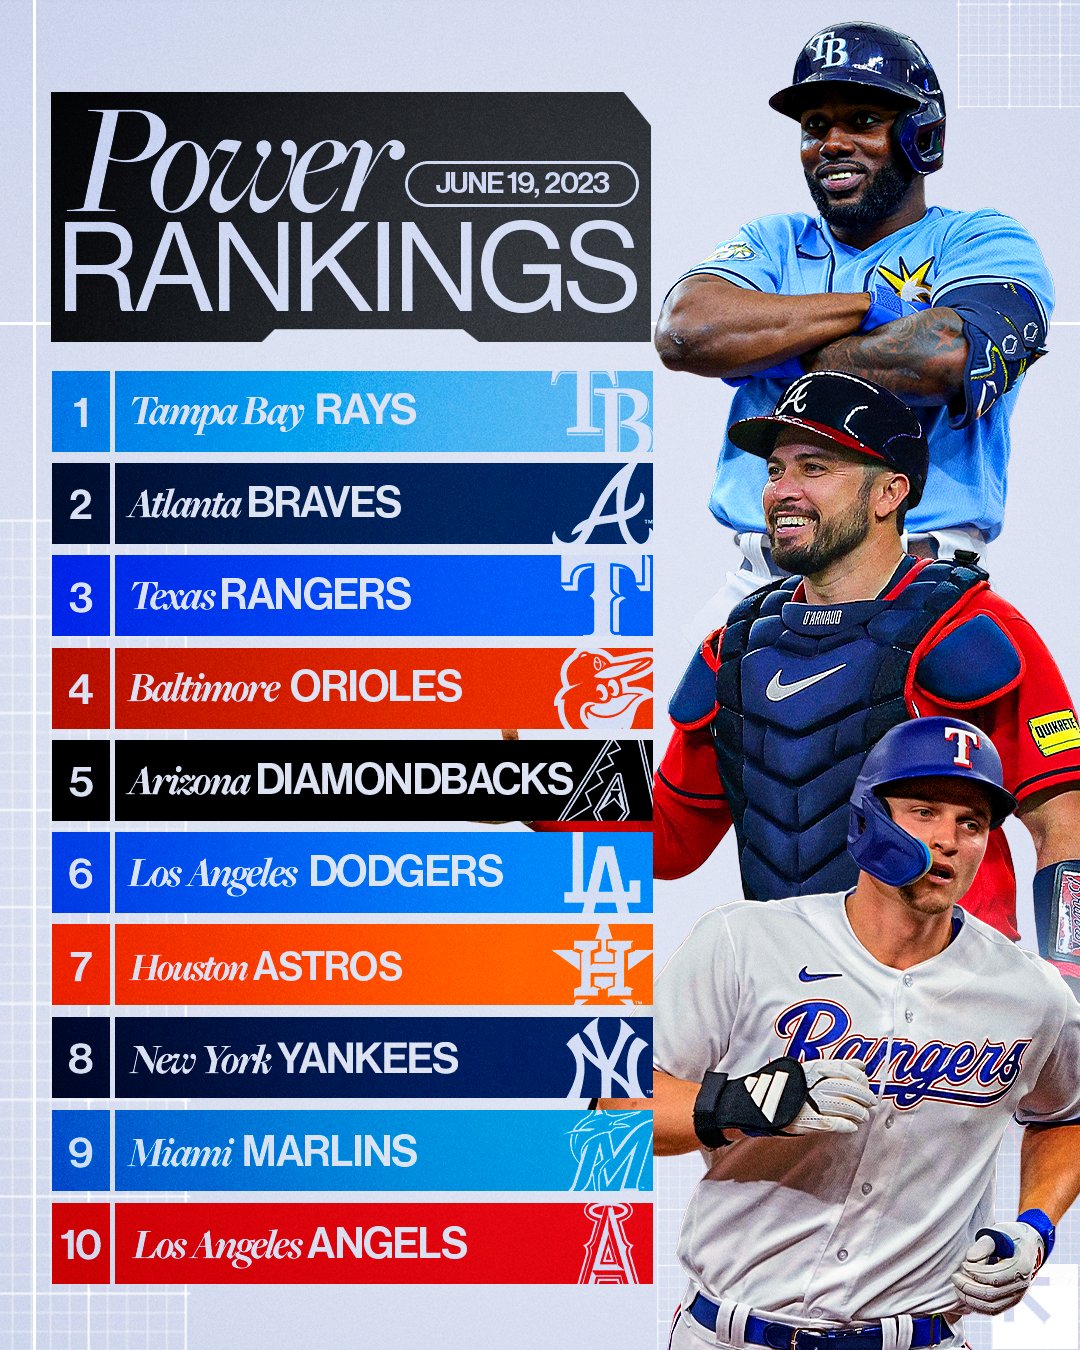 MLB on X: The red-hot @Marlins jump into the Top 10 in this